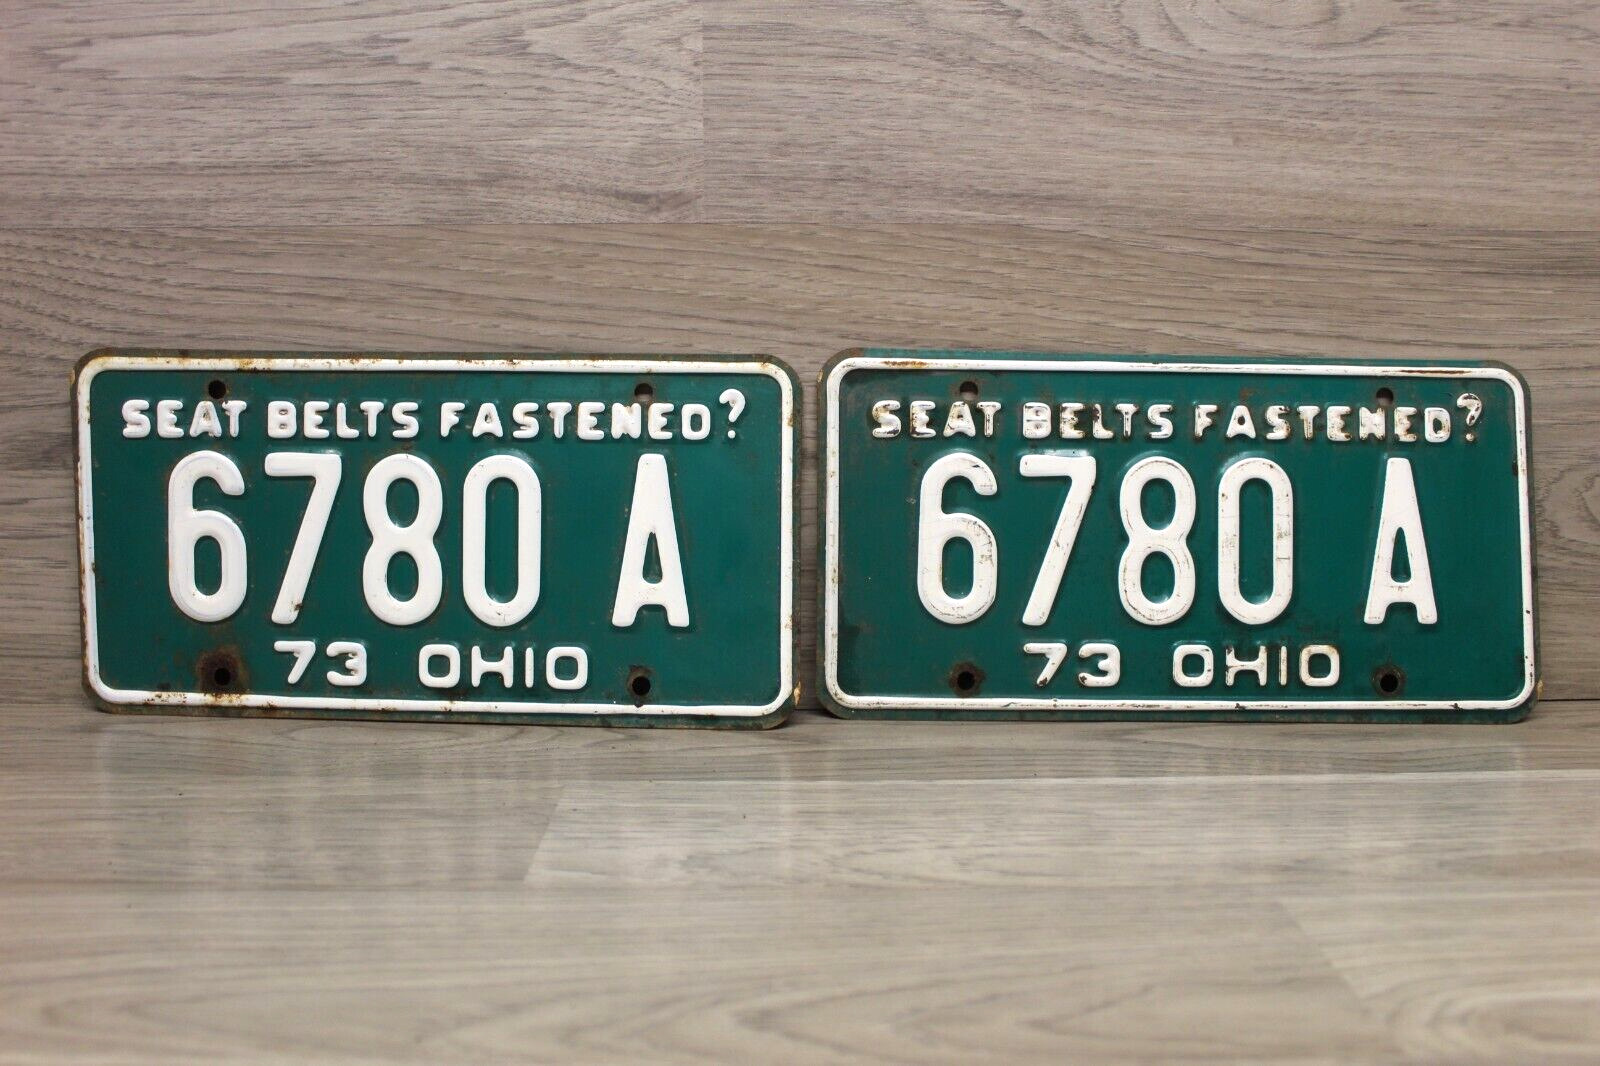 Ohio 1973 SEAT BELTS FASTENED? License Plate Pair 6780 A